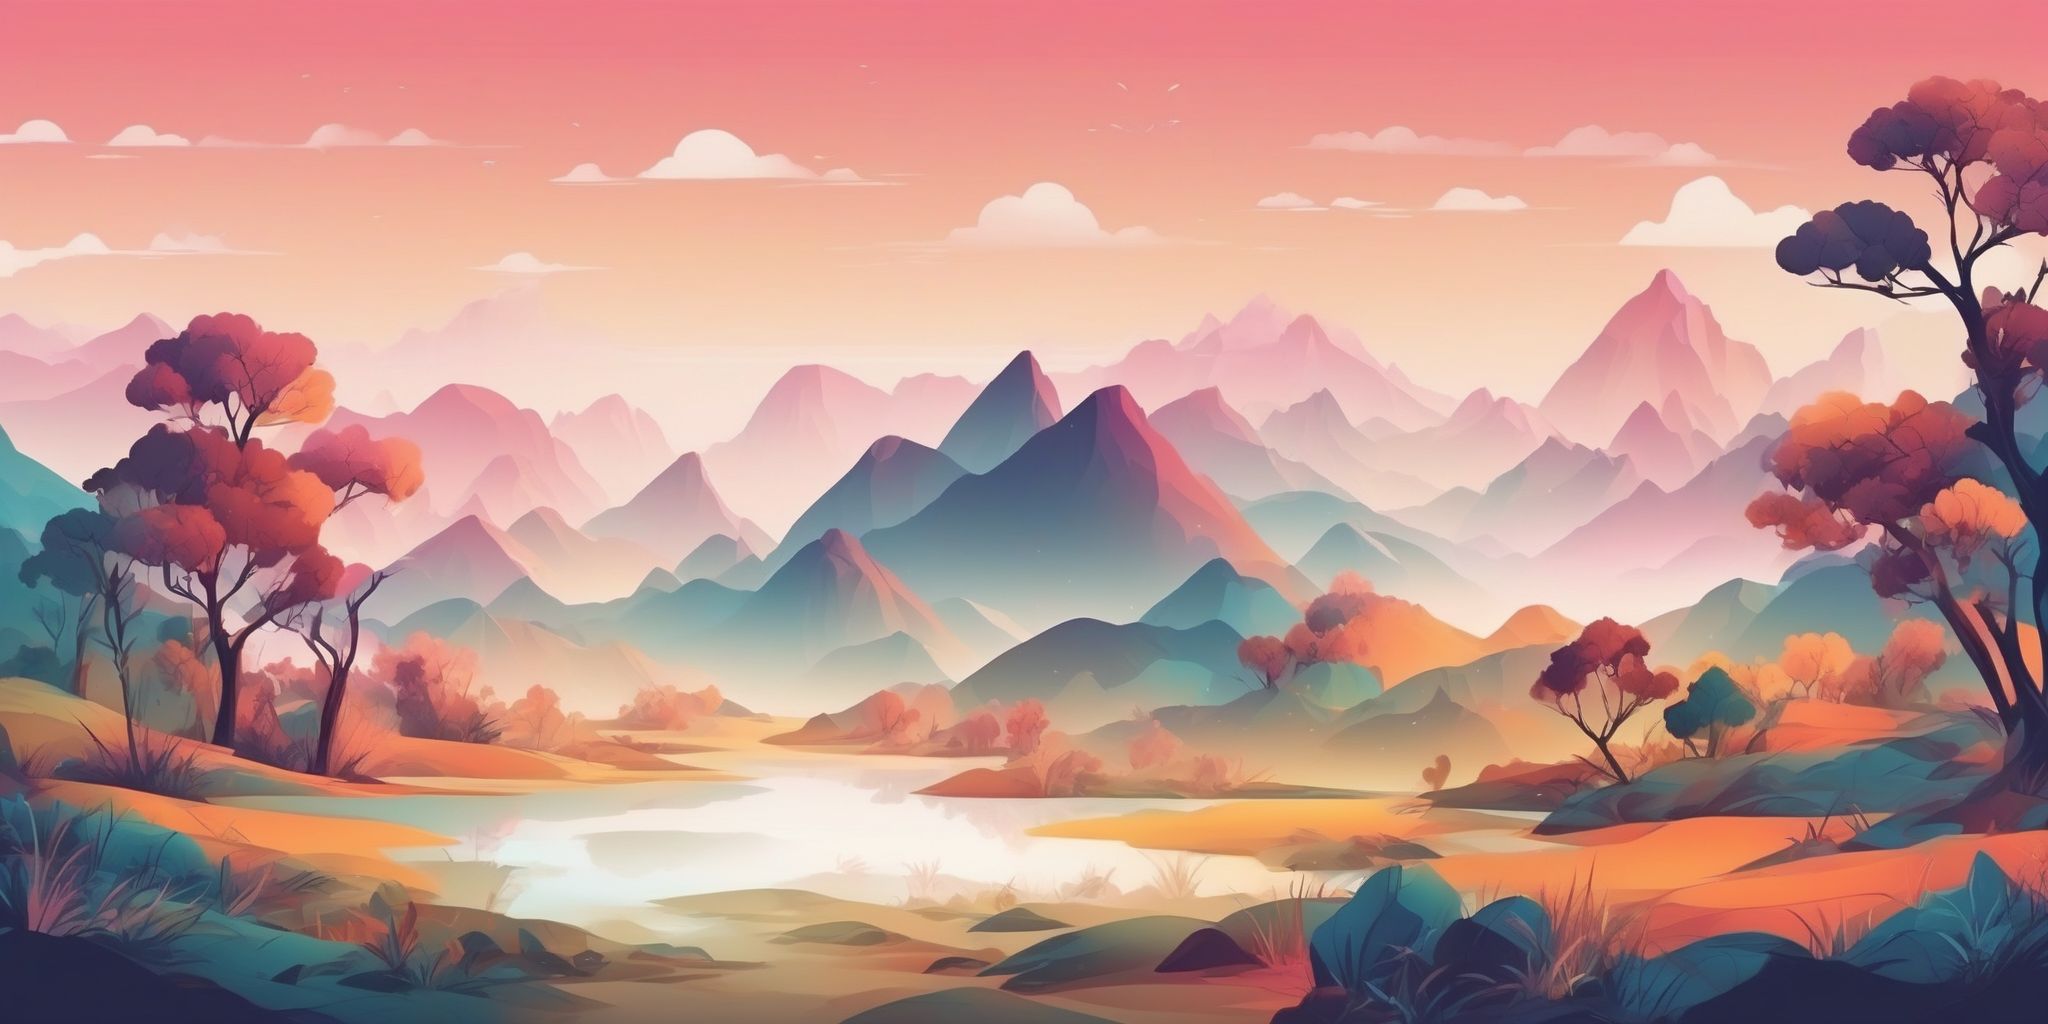 Digital landscape in illustration style with gradients and white background